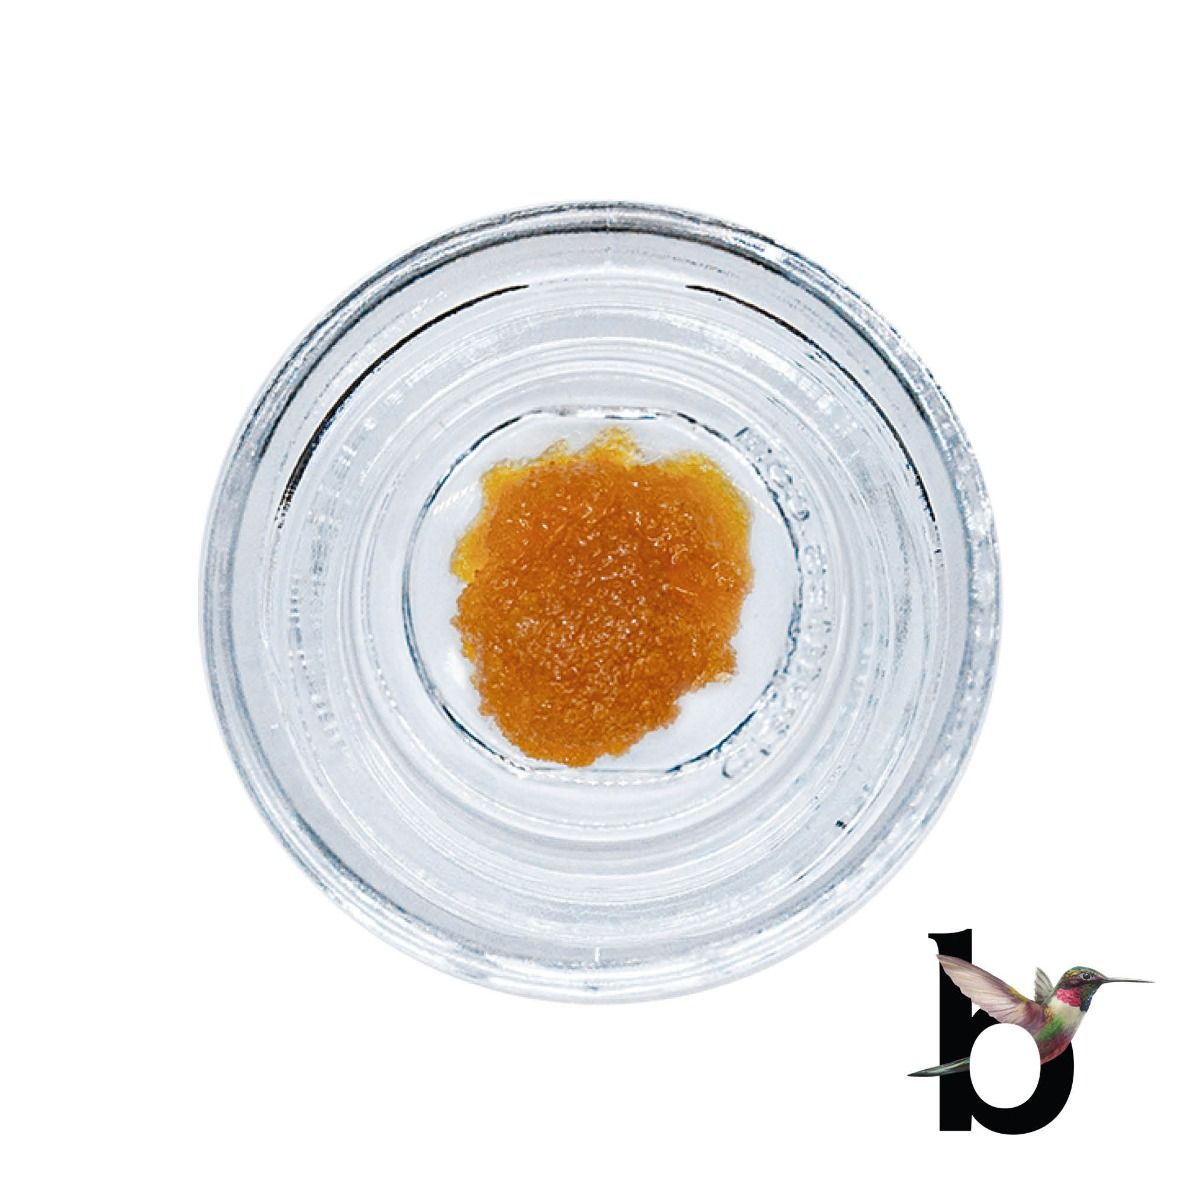 Cat Cay - Live Resin 1G